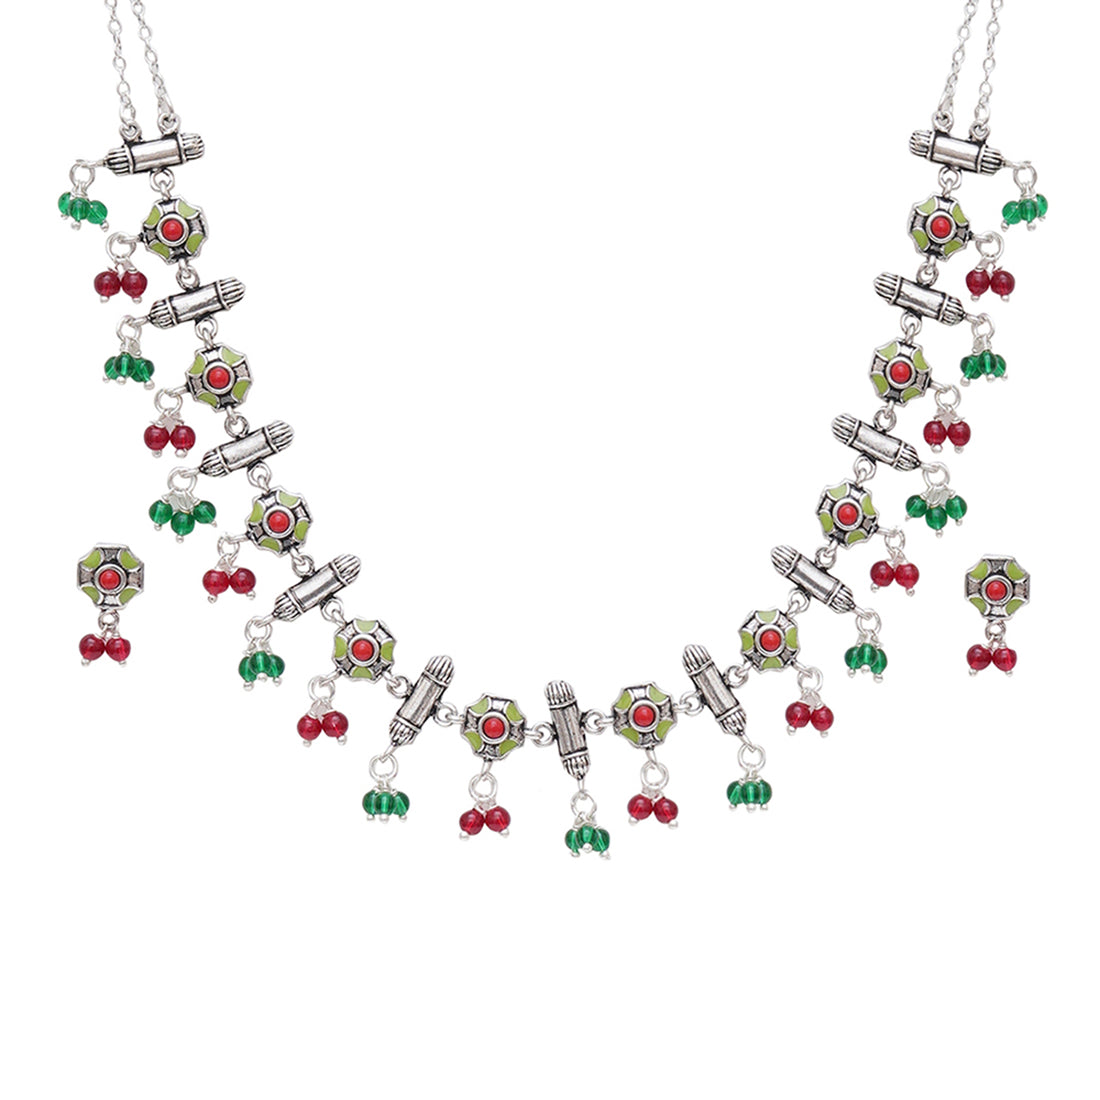 Festive Hues Intricate Enameled Choker Necklace Set with Artisanal Motifs and Green Beads